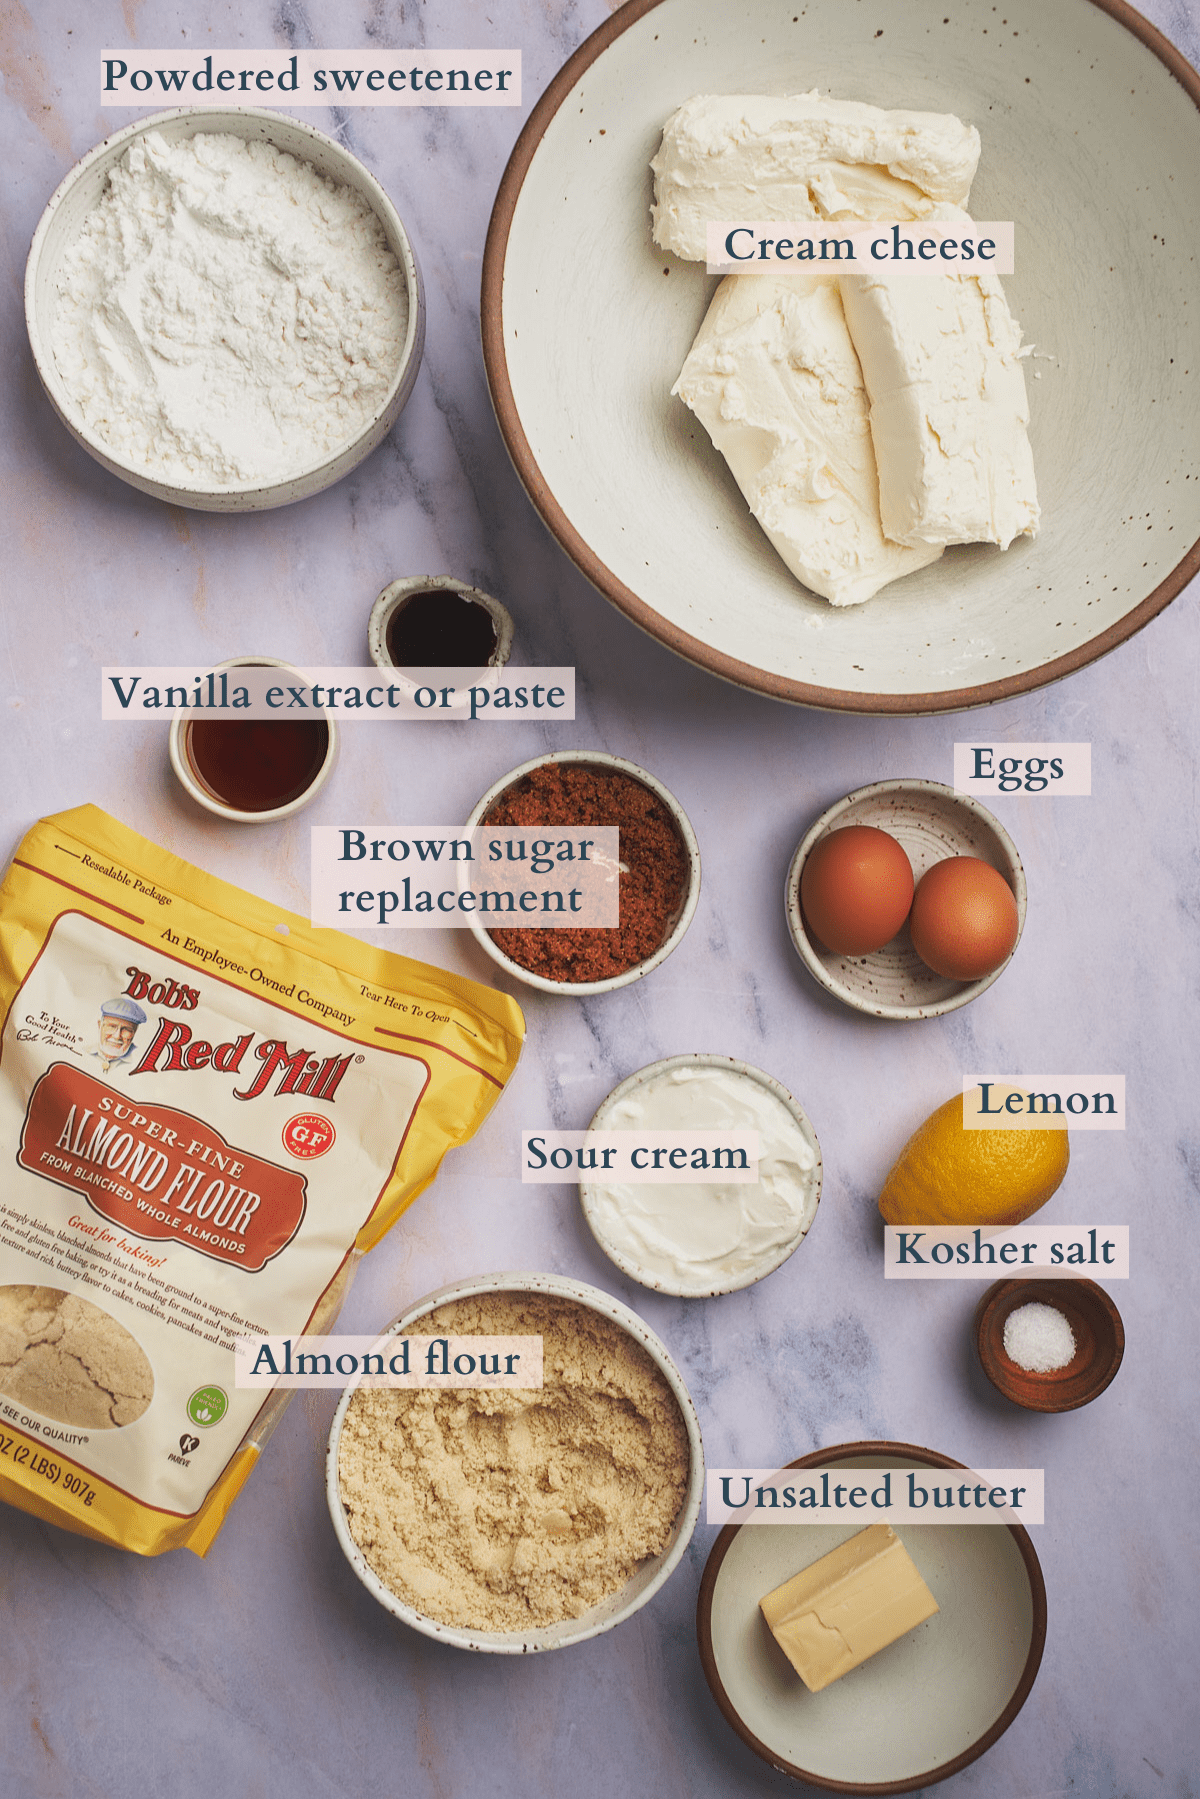 ingredients to make keto cheesecake with sour cream, cream cheese, powdered sweetener, brown sugar replacement, vanilla extract, kosher salt, eggs, lemon, butter, and almond flour.